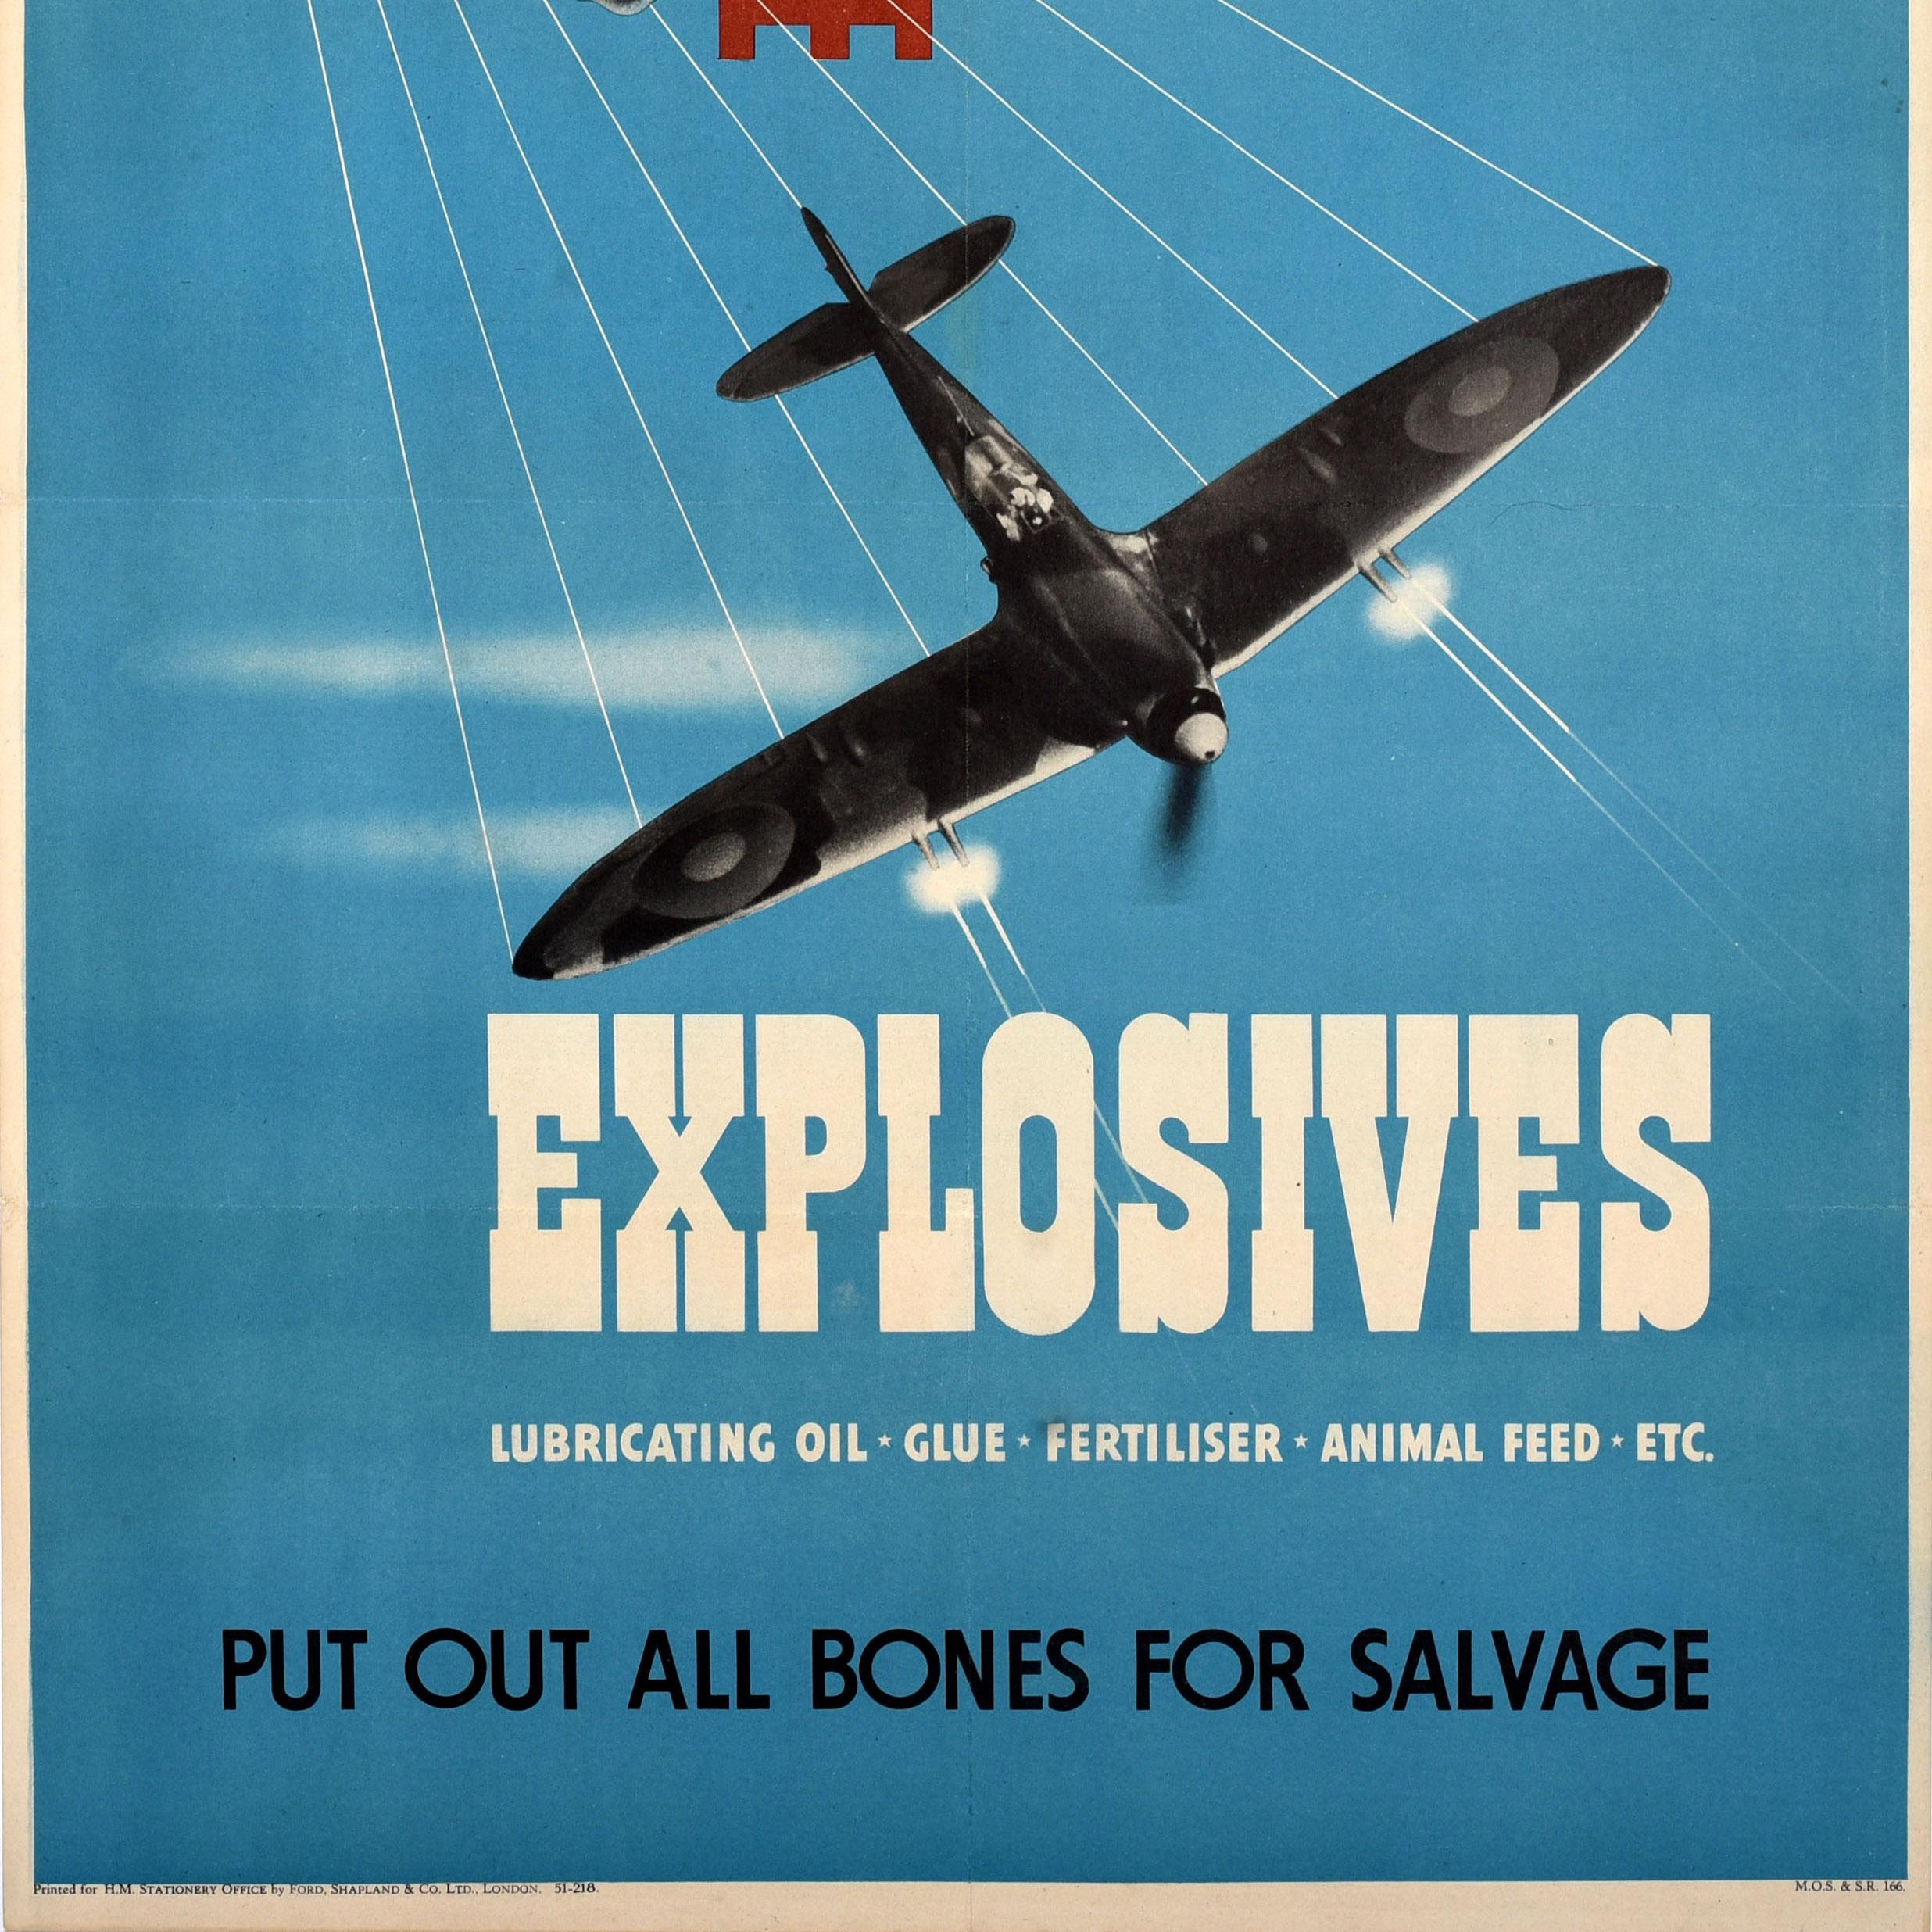 Original vintage World War Two Home Front recycling poster - Bones Make Explosives Put Out All Bones For Salvage - featuring a great modernist graphic design by Reginald Mount (1906-1979) of an RAF Royal Air Force spitfire plane firing its machine